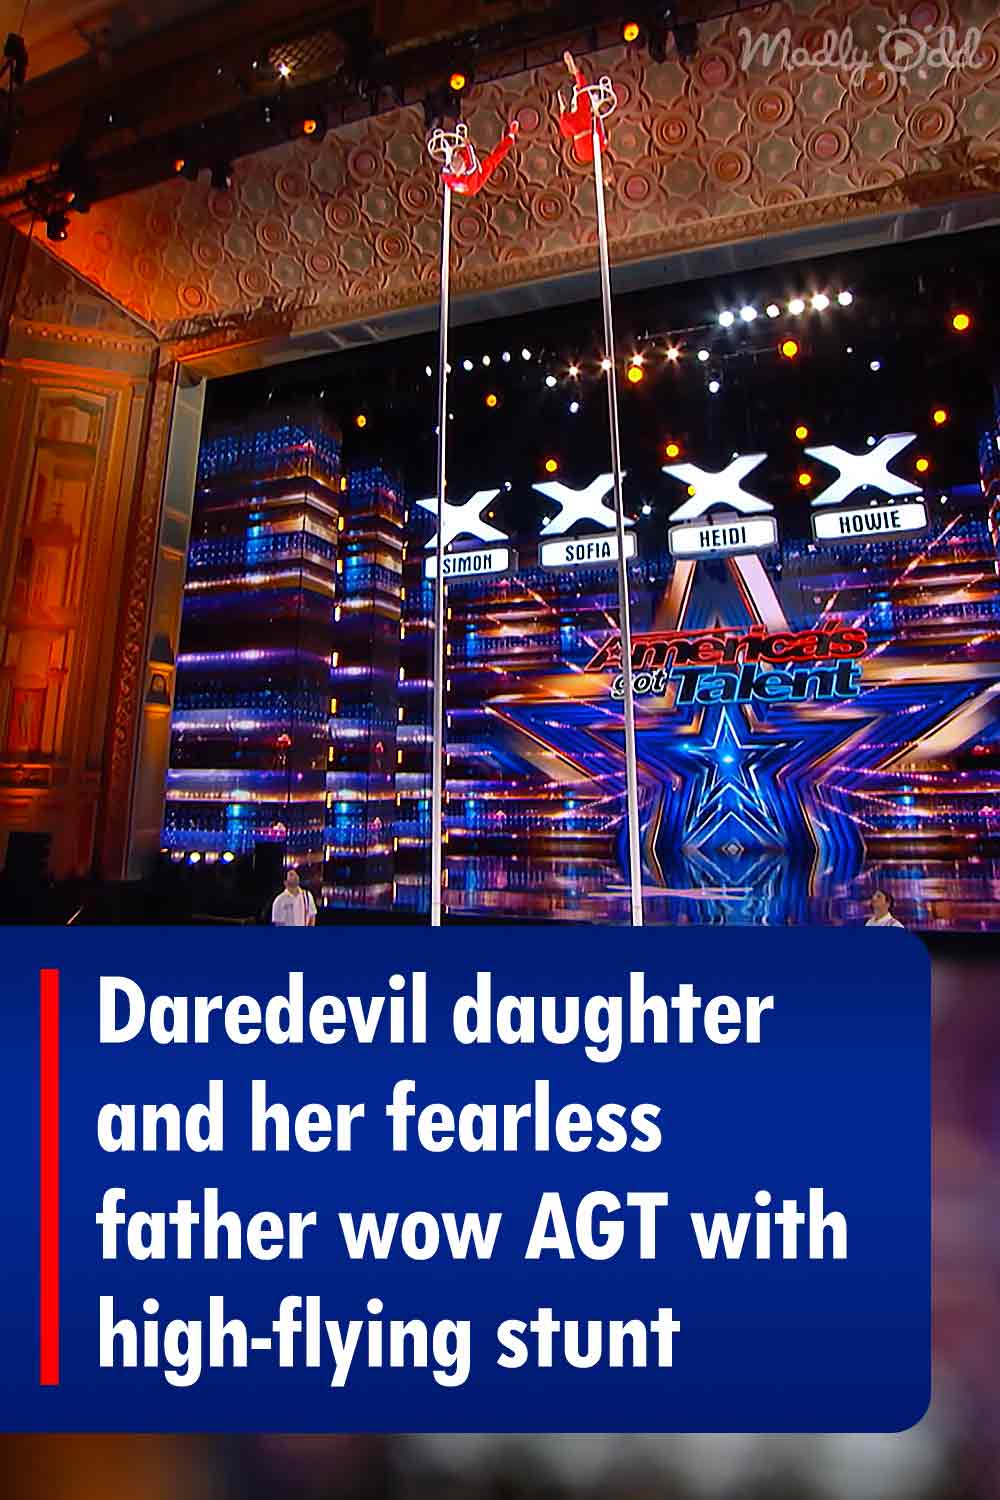 Daredevil daughter and her fearless father wow AGT with high-flying stunt